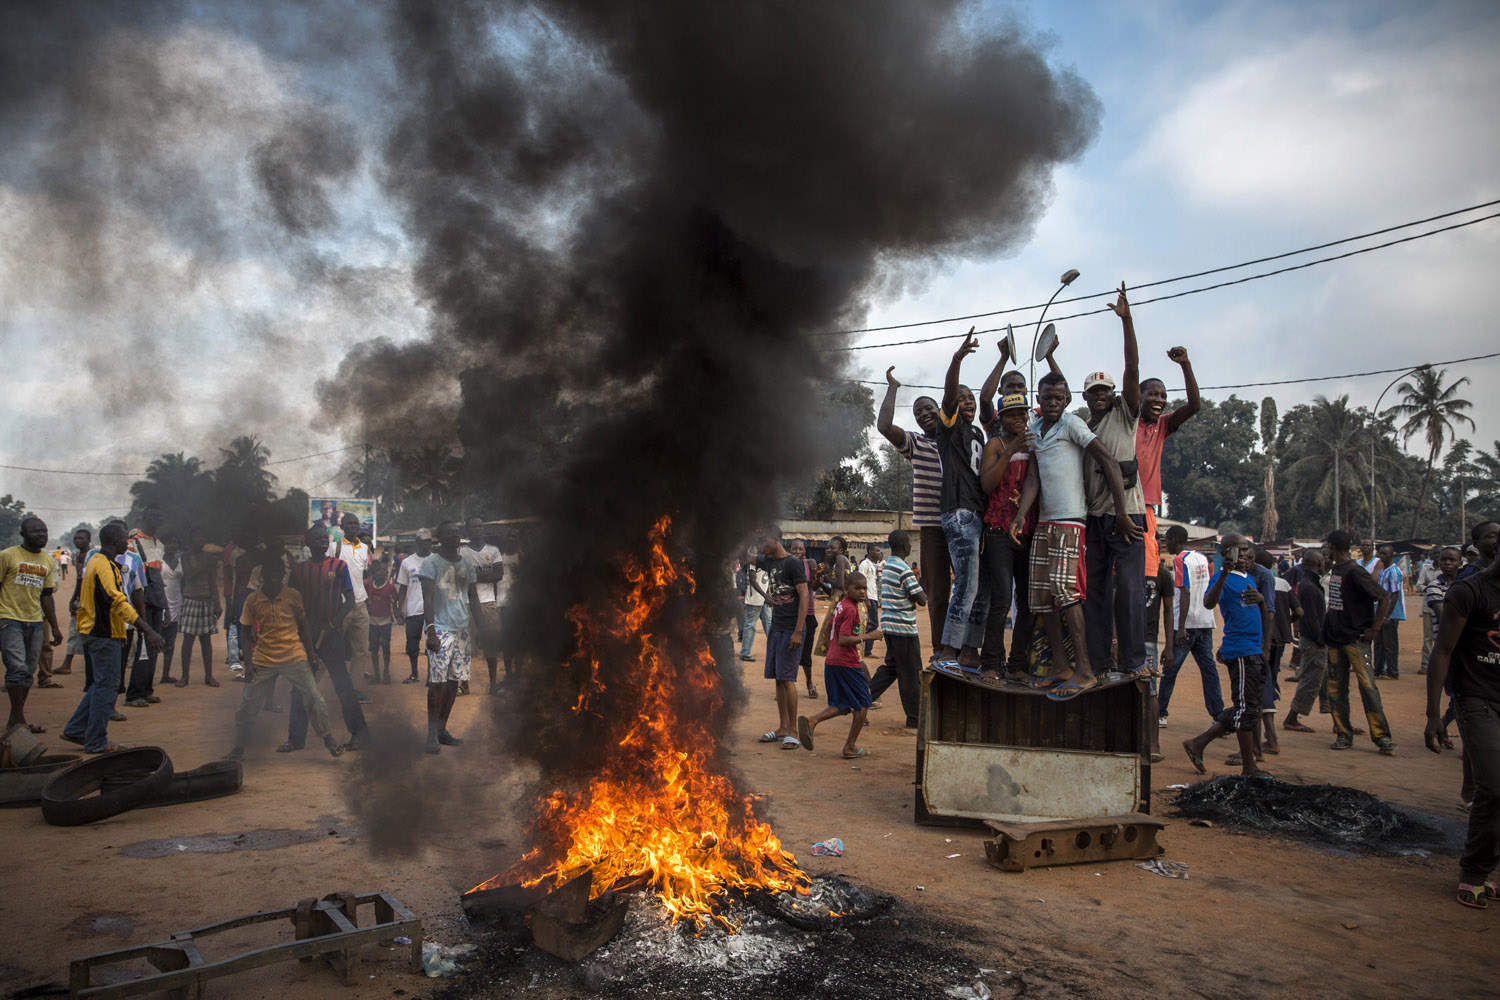 People demonstrate violently in a street in Bangui asking for the president Djotodia to step down, following the murder of a magistrate shot dead the night before along with another man. 30 minutes later the Seleka came and shot towards the demonstrators, killing 2 men and wounded one.